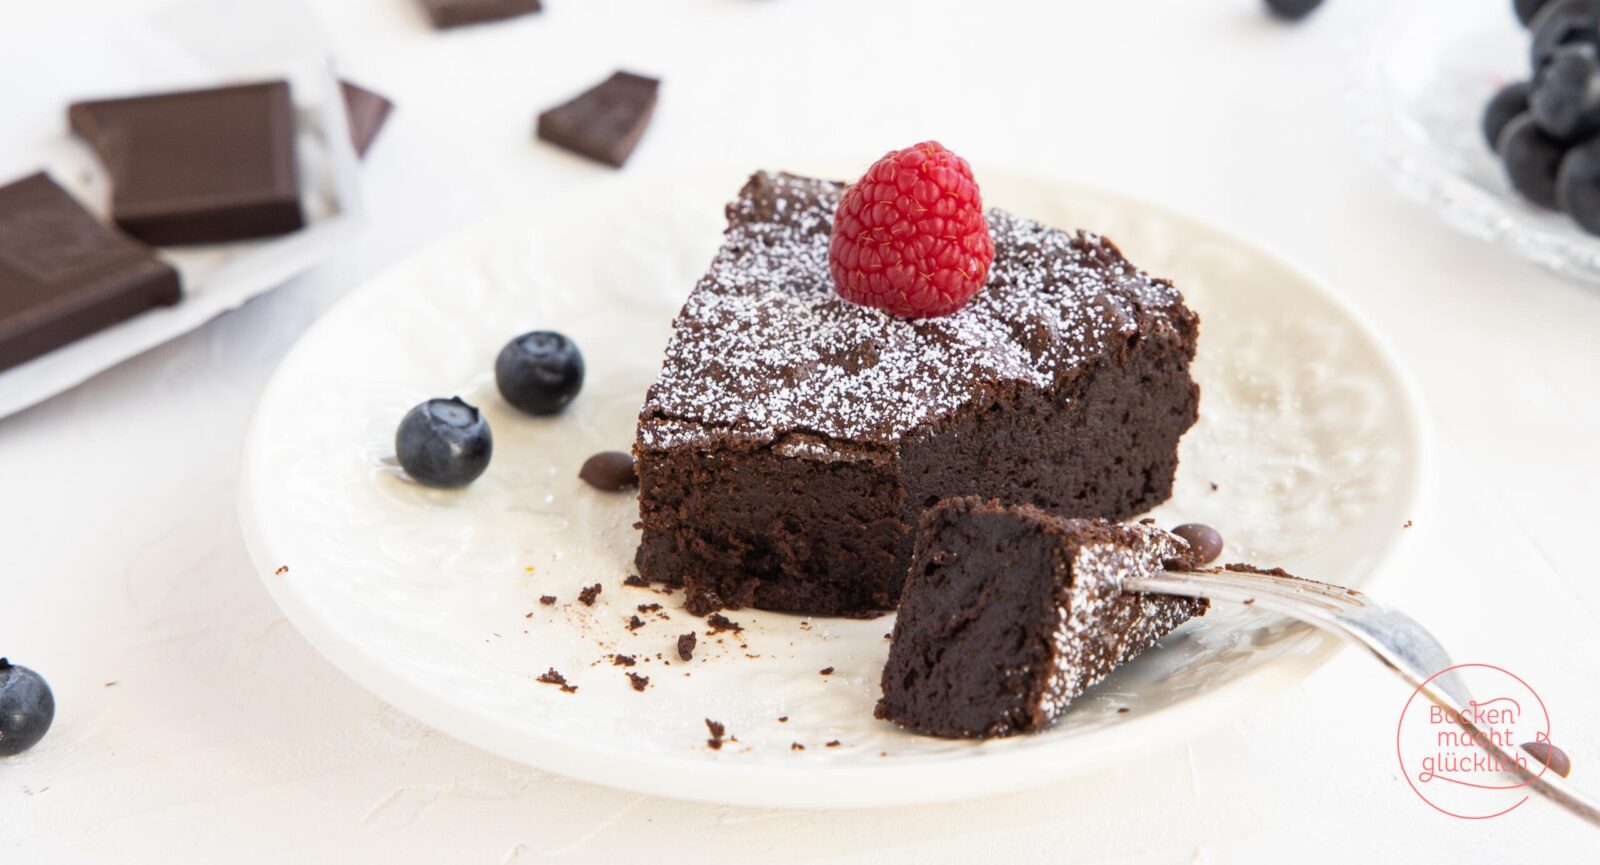 Chocolate cake made of 3 ingredients |  Baking makes you happy